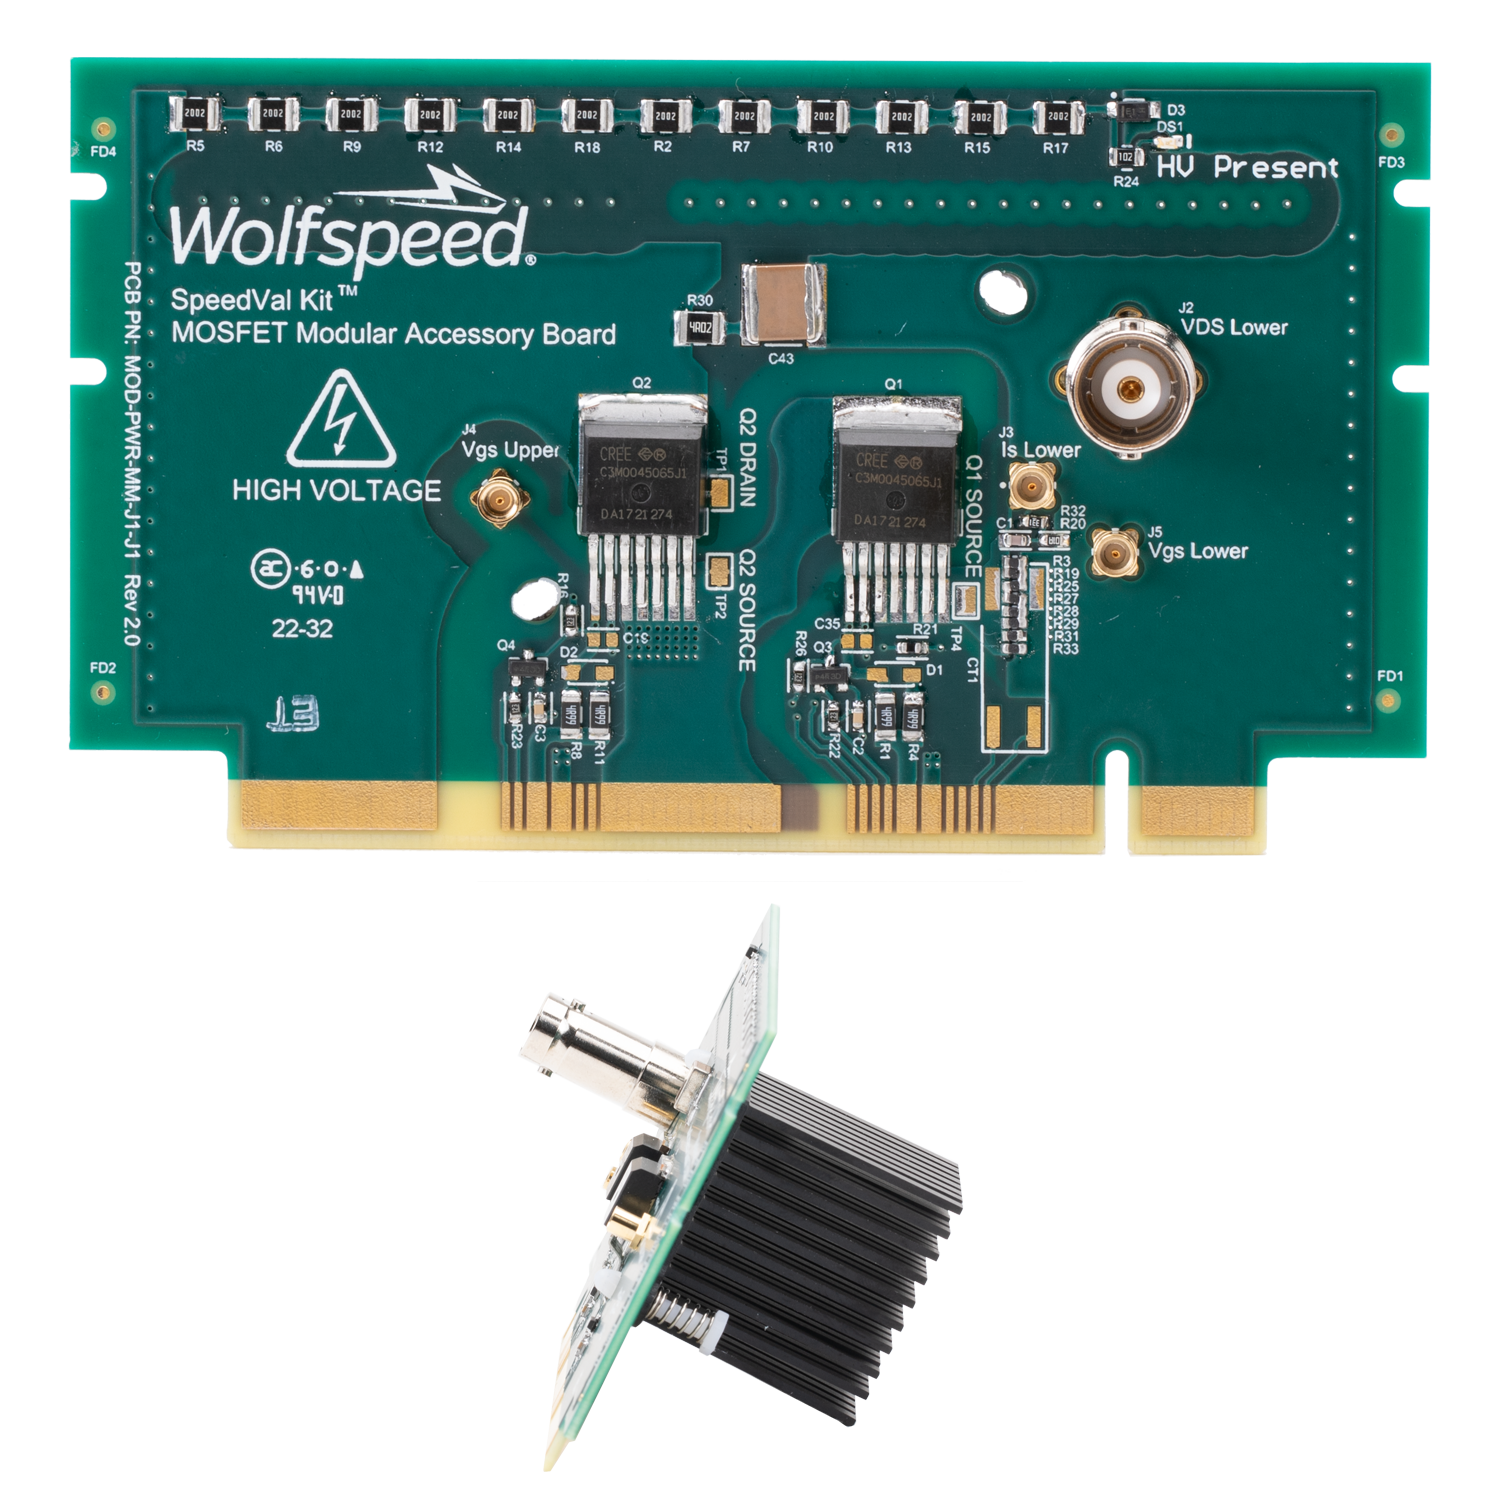 Product shot of Wolfspeed's MOD-PWR-MM, a MOSFET modular accessory board (power daughter card), in a TO-263-7 package designed for Wolfspeed's SpeedVal Kit modular evaluation platform.